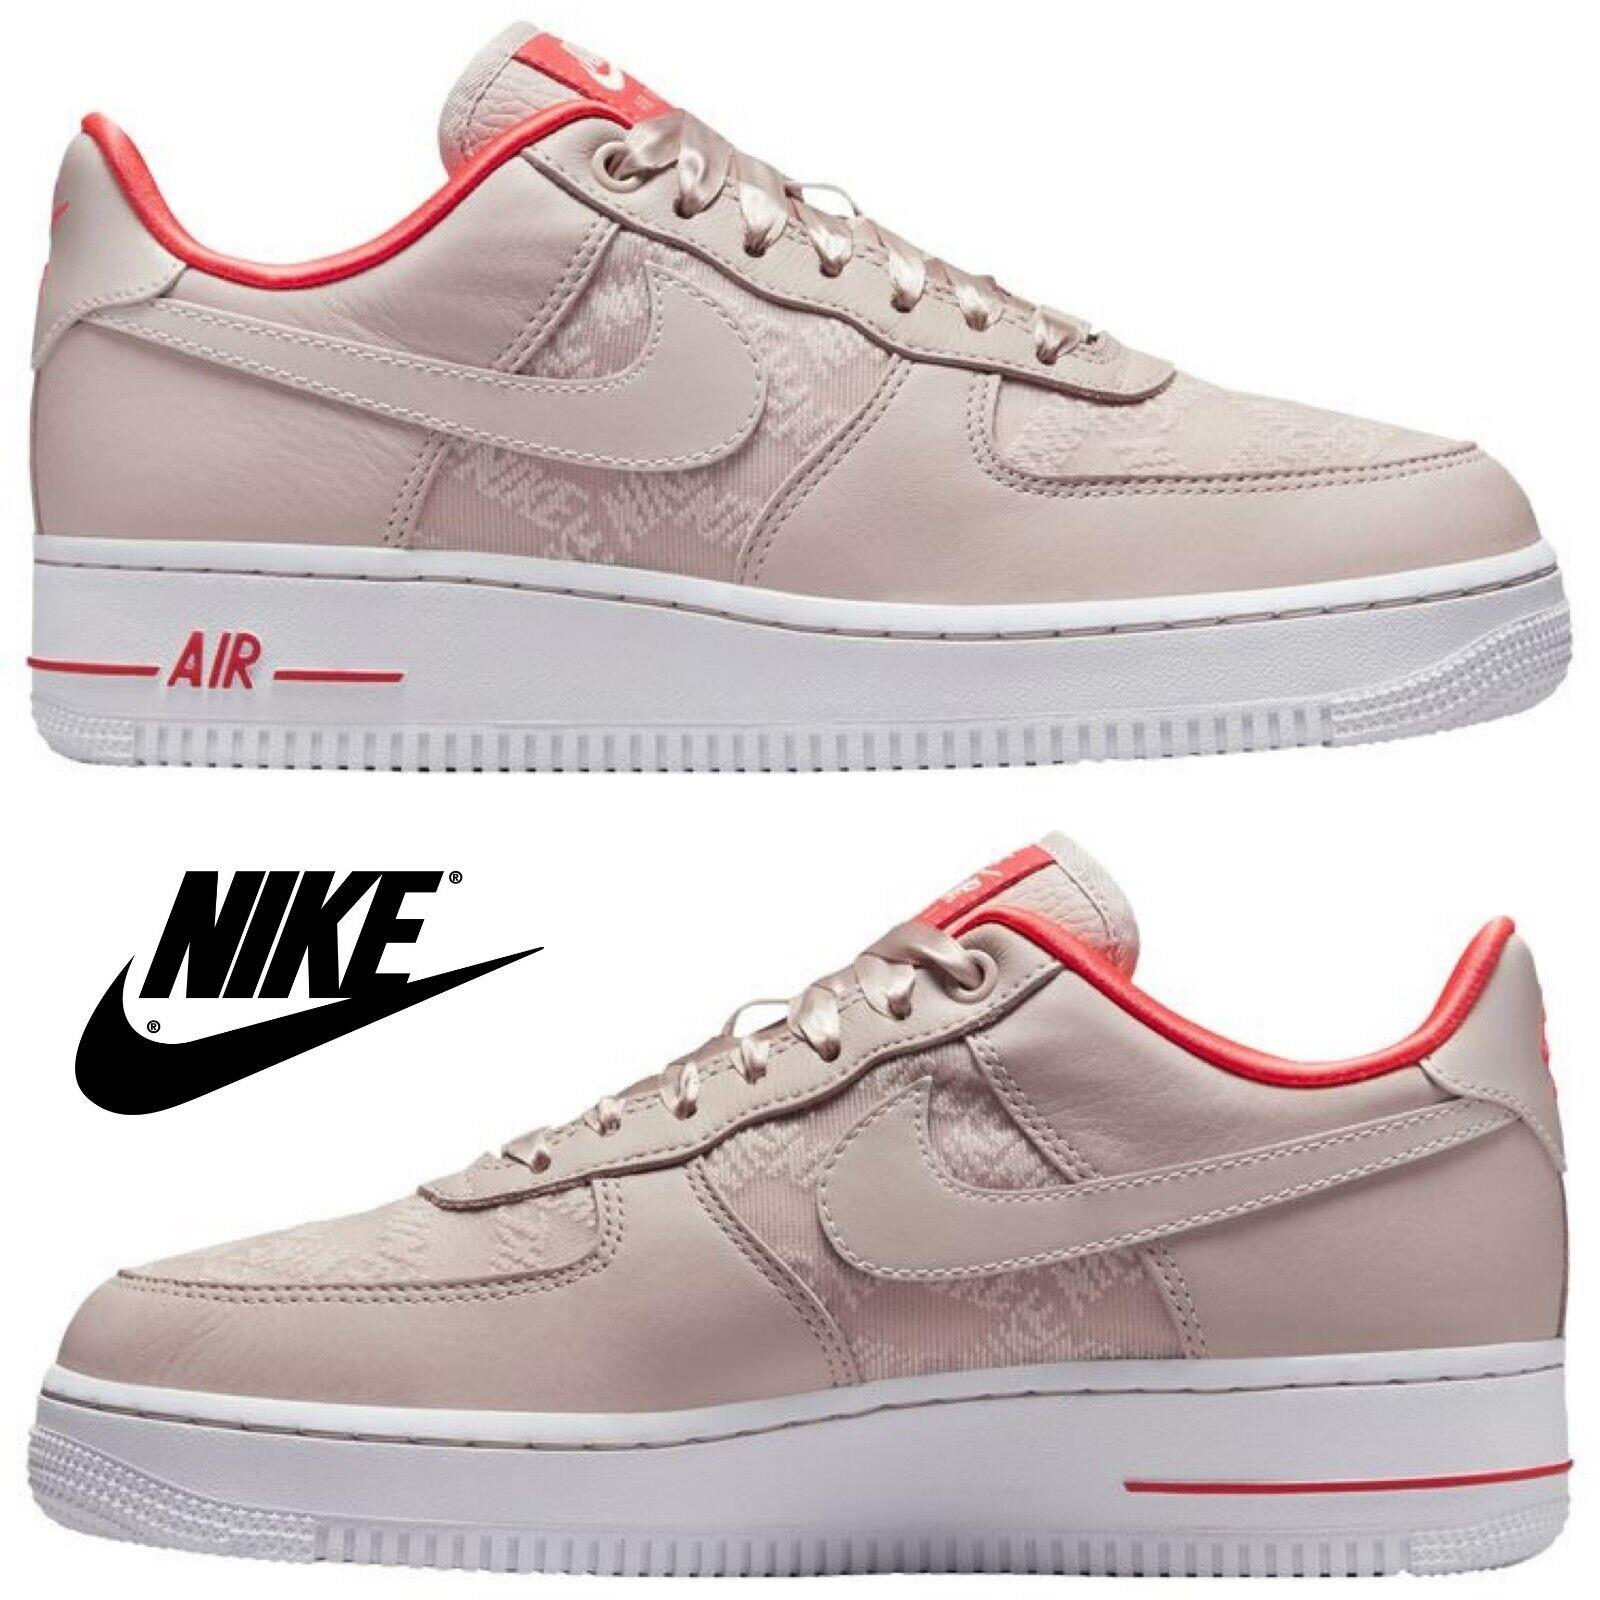 Nike Air Force 1 `07 Casual Shoes Women`s Sneakers Walking Sport White - White , Brown/White Manufacturer